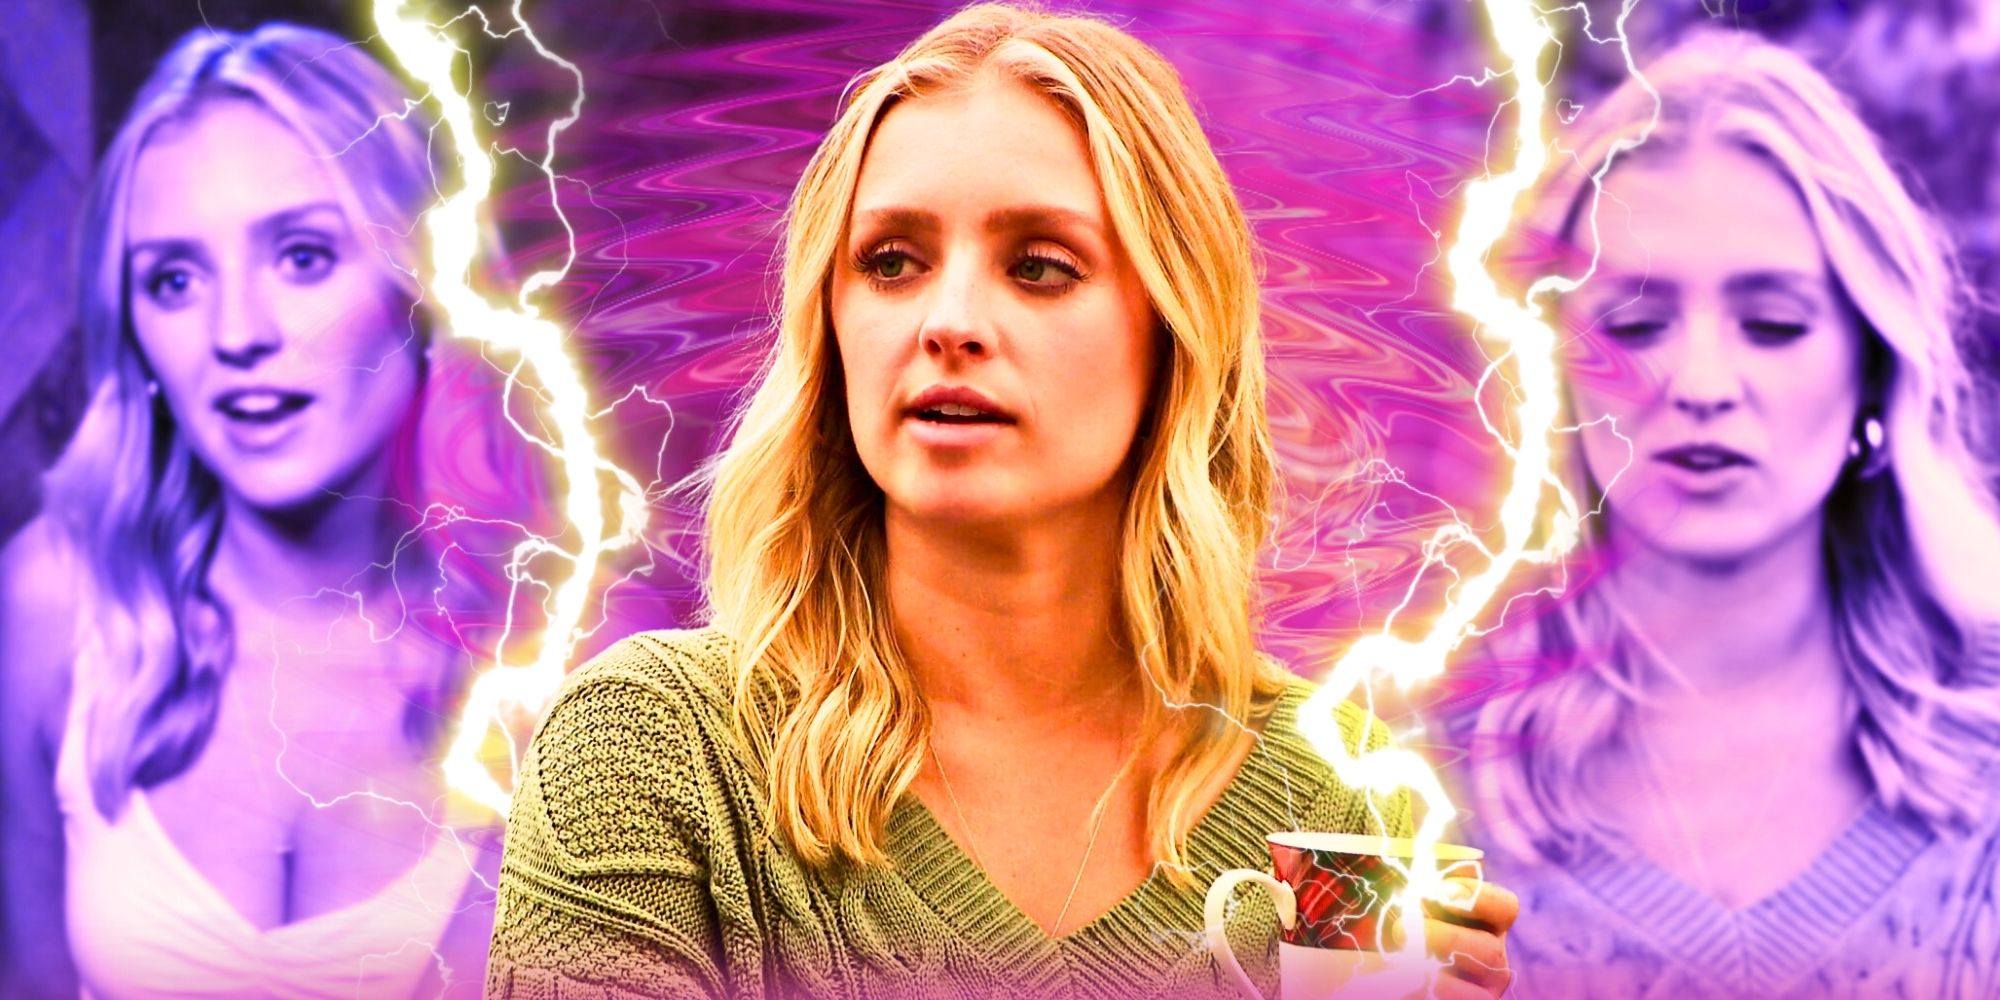 The Bachelor's Daisy Kent is featured three times in a montage image while surrounded by lightning.